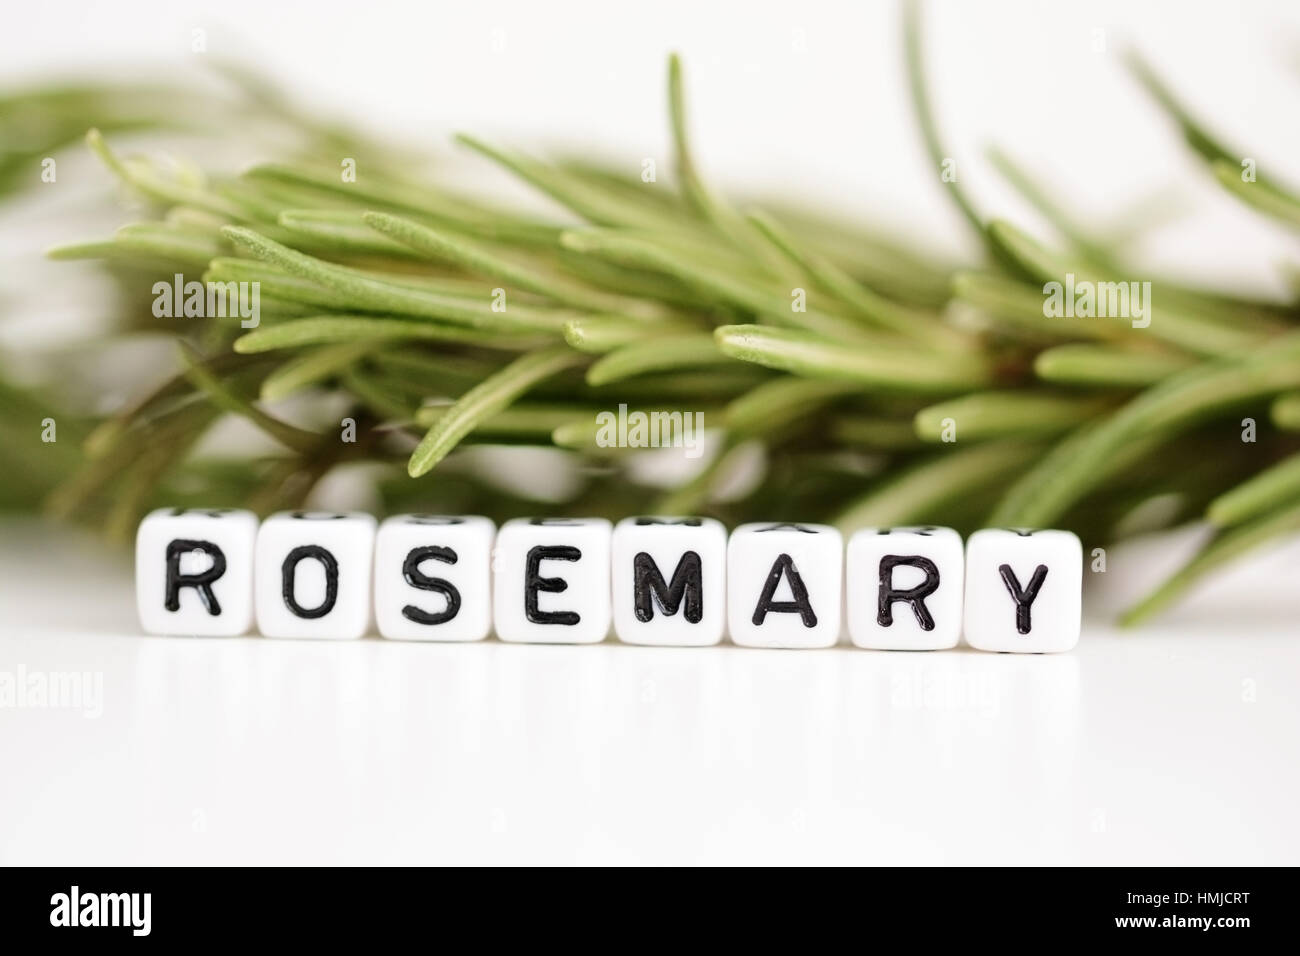 Blurred branch of rosemary in the background with close-up on plastic letter beads spelling “rosemary” Stock Photo